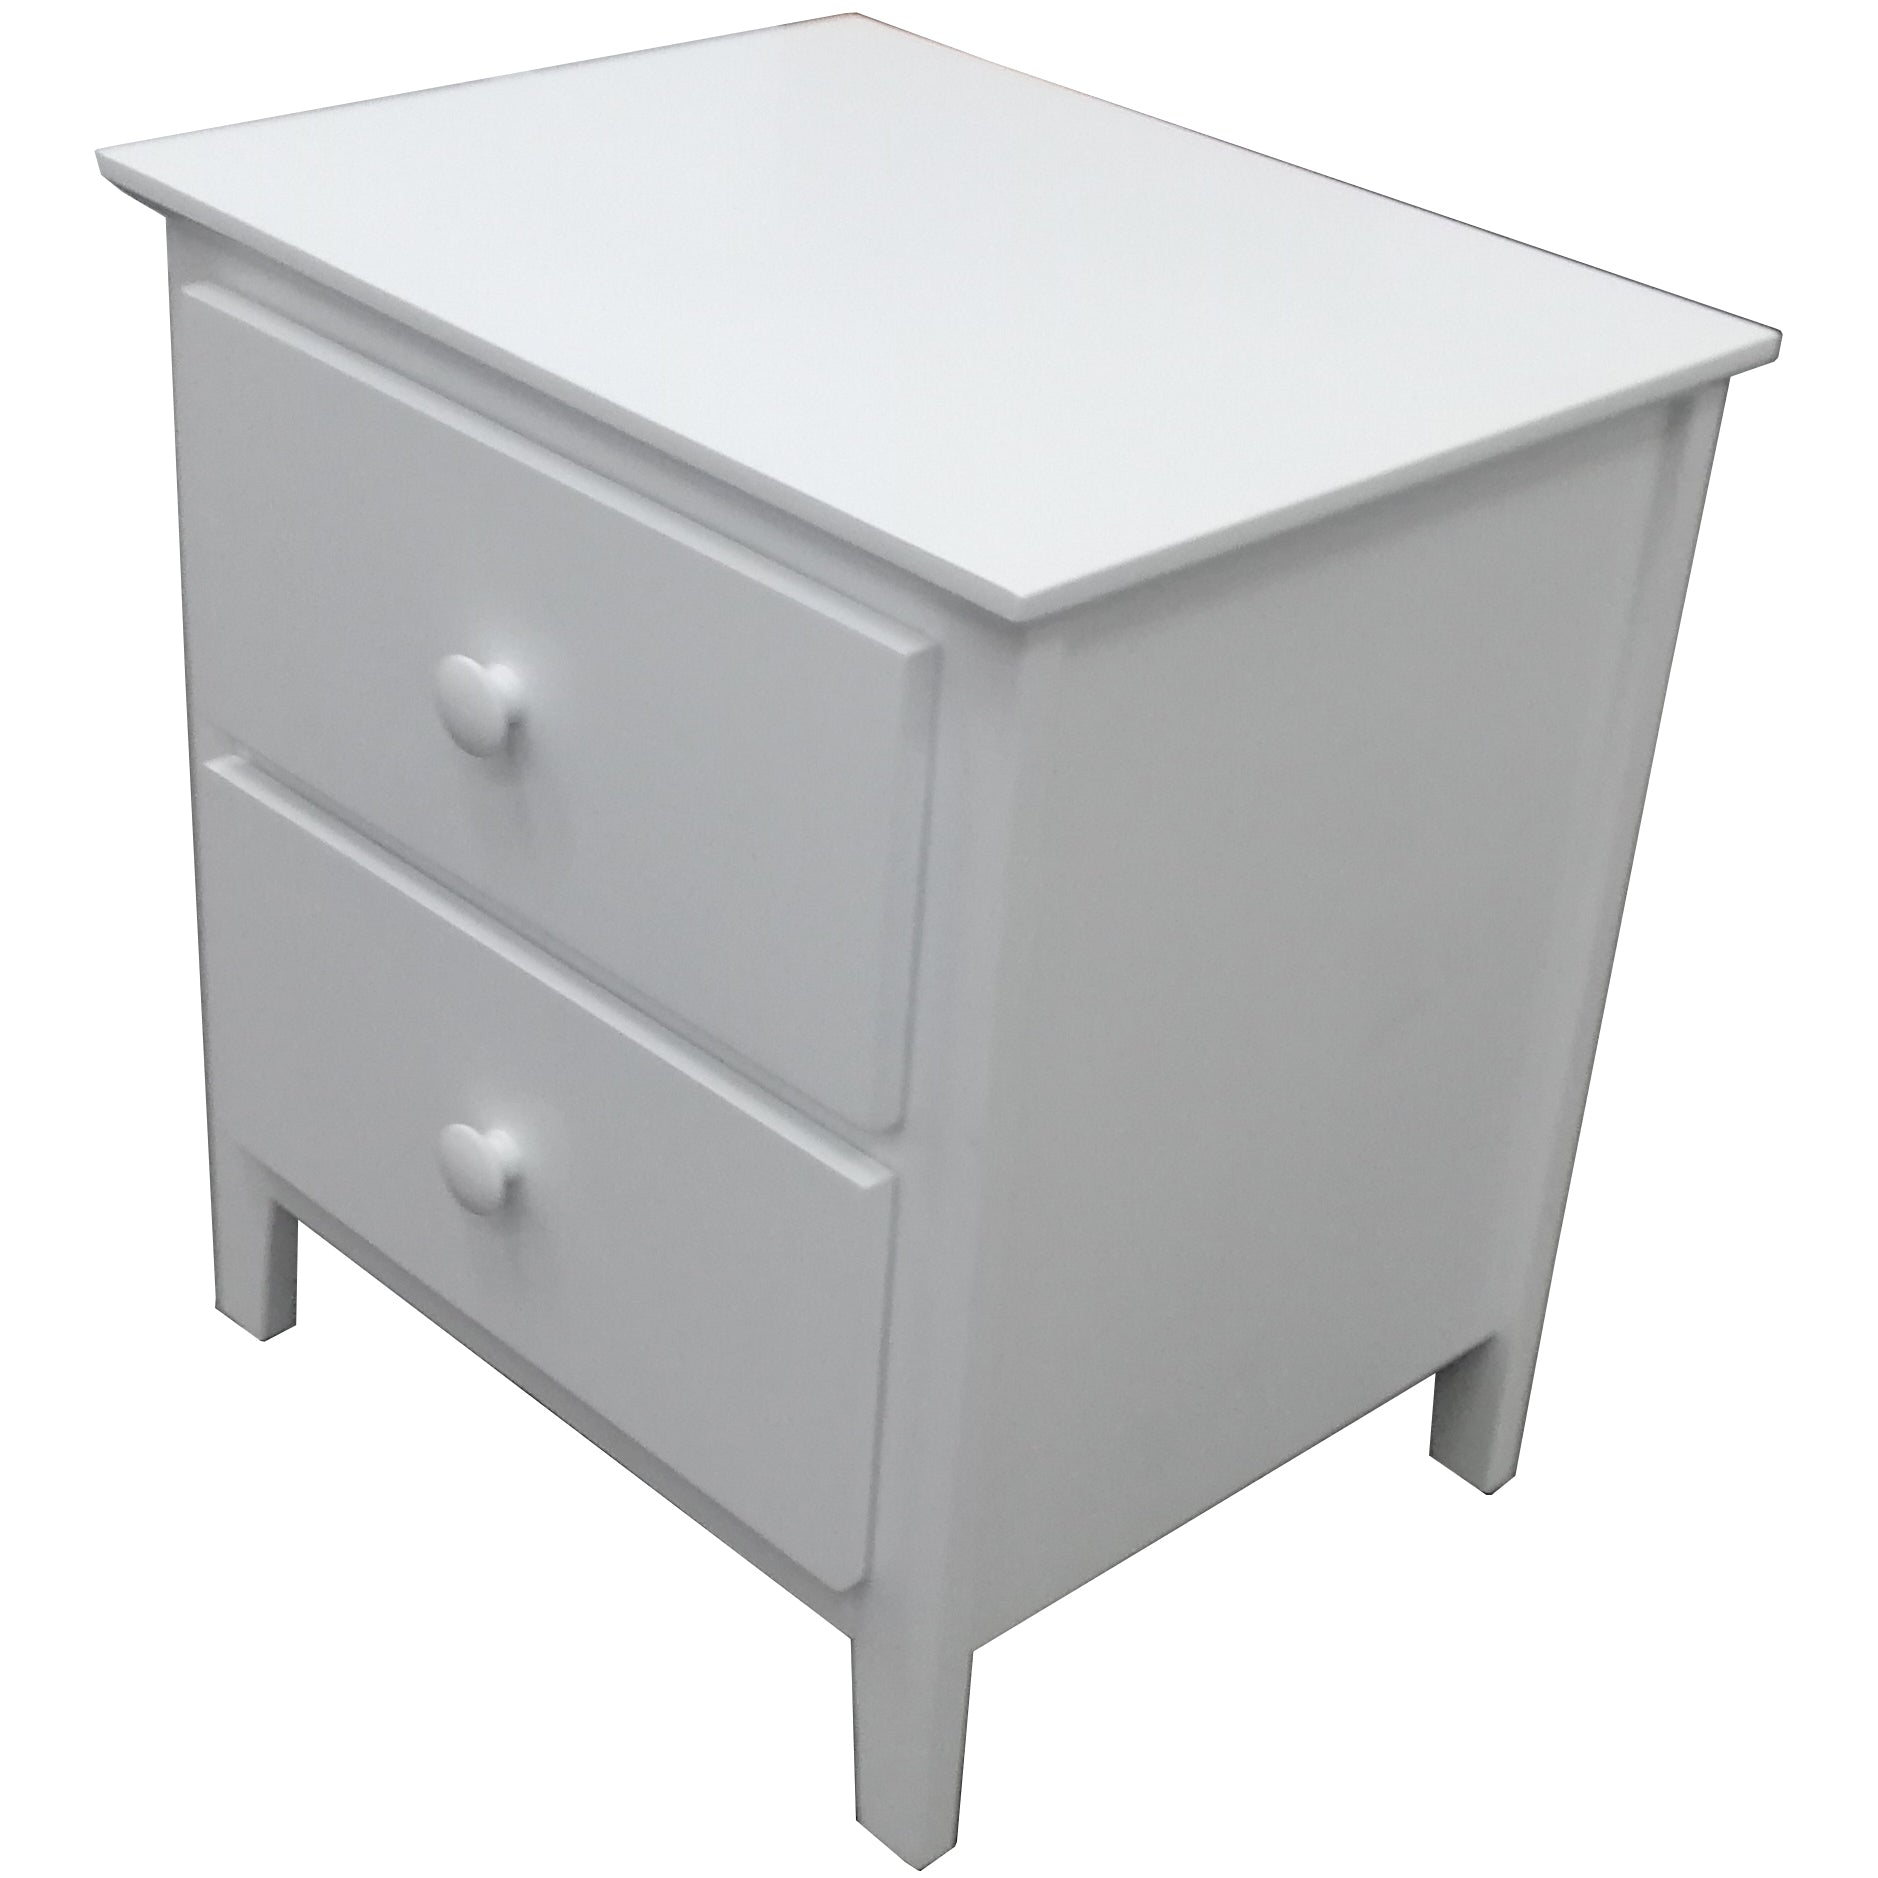 2 Pc Bedside Bedroom Set Drawers Nightstand  Storage Cabinet - White